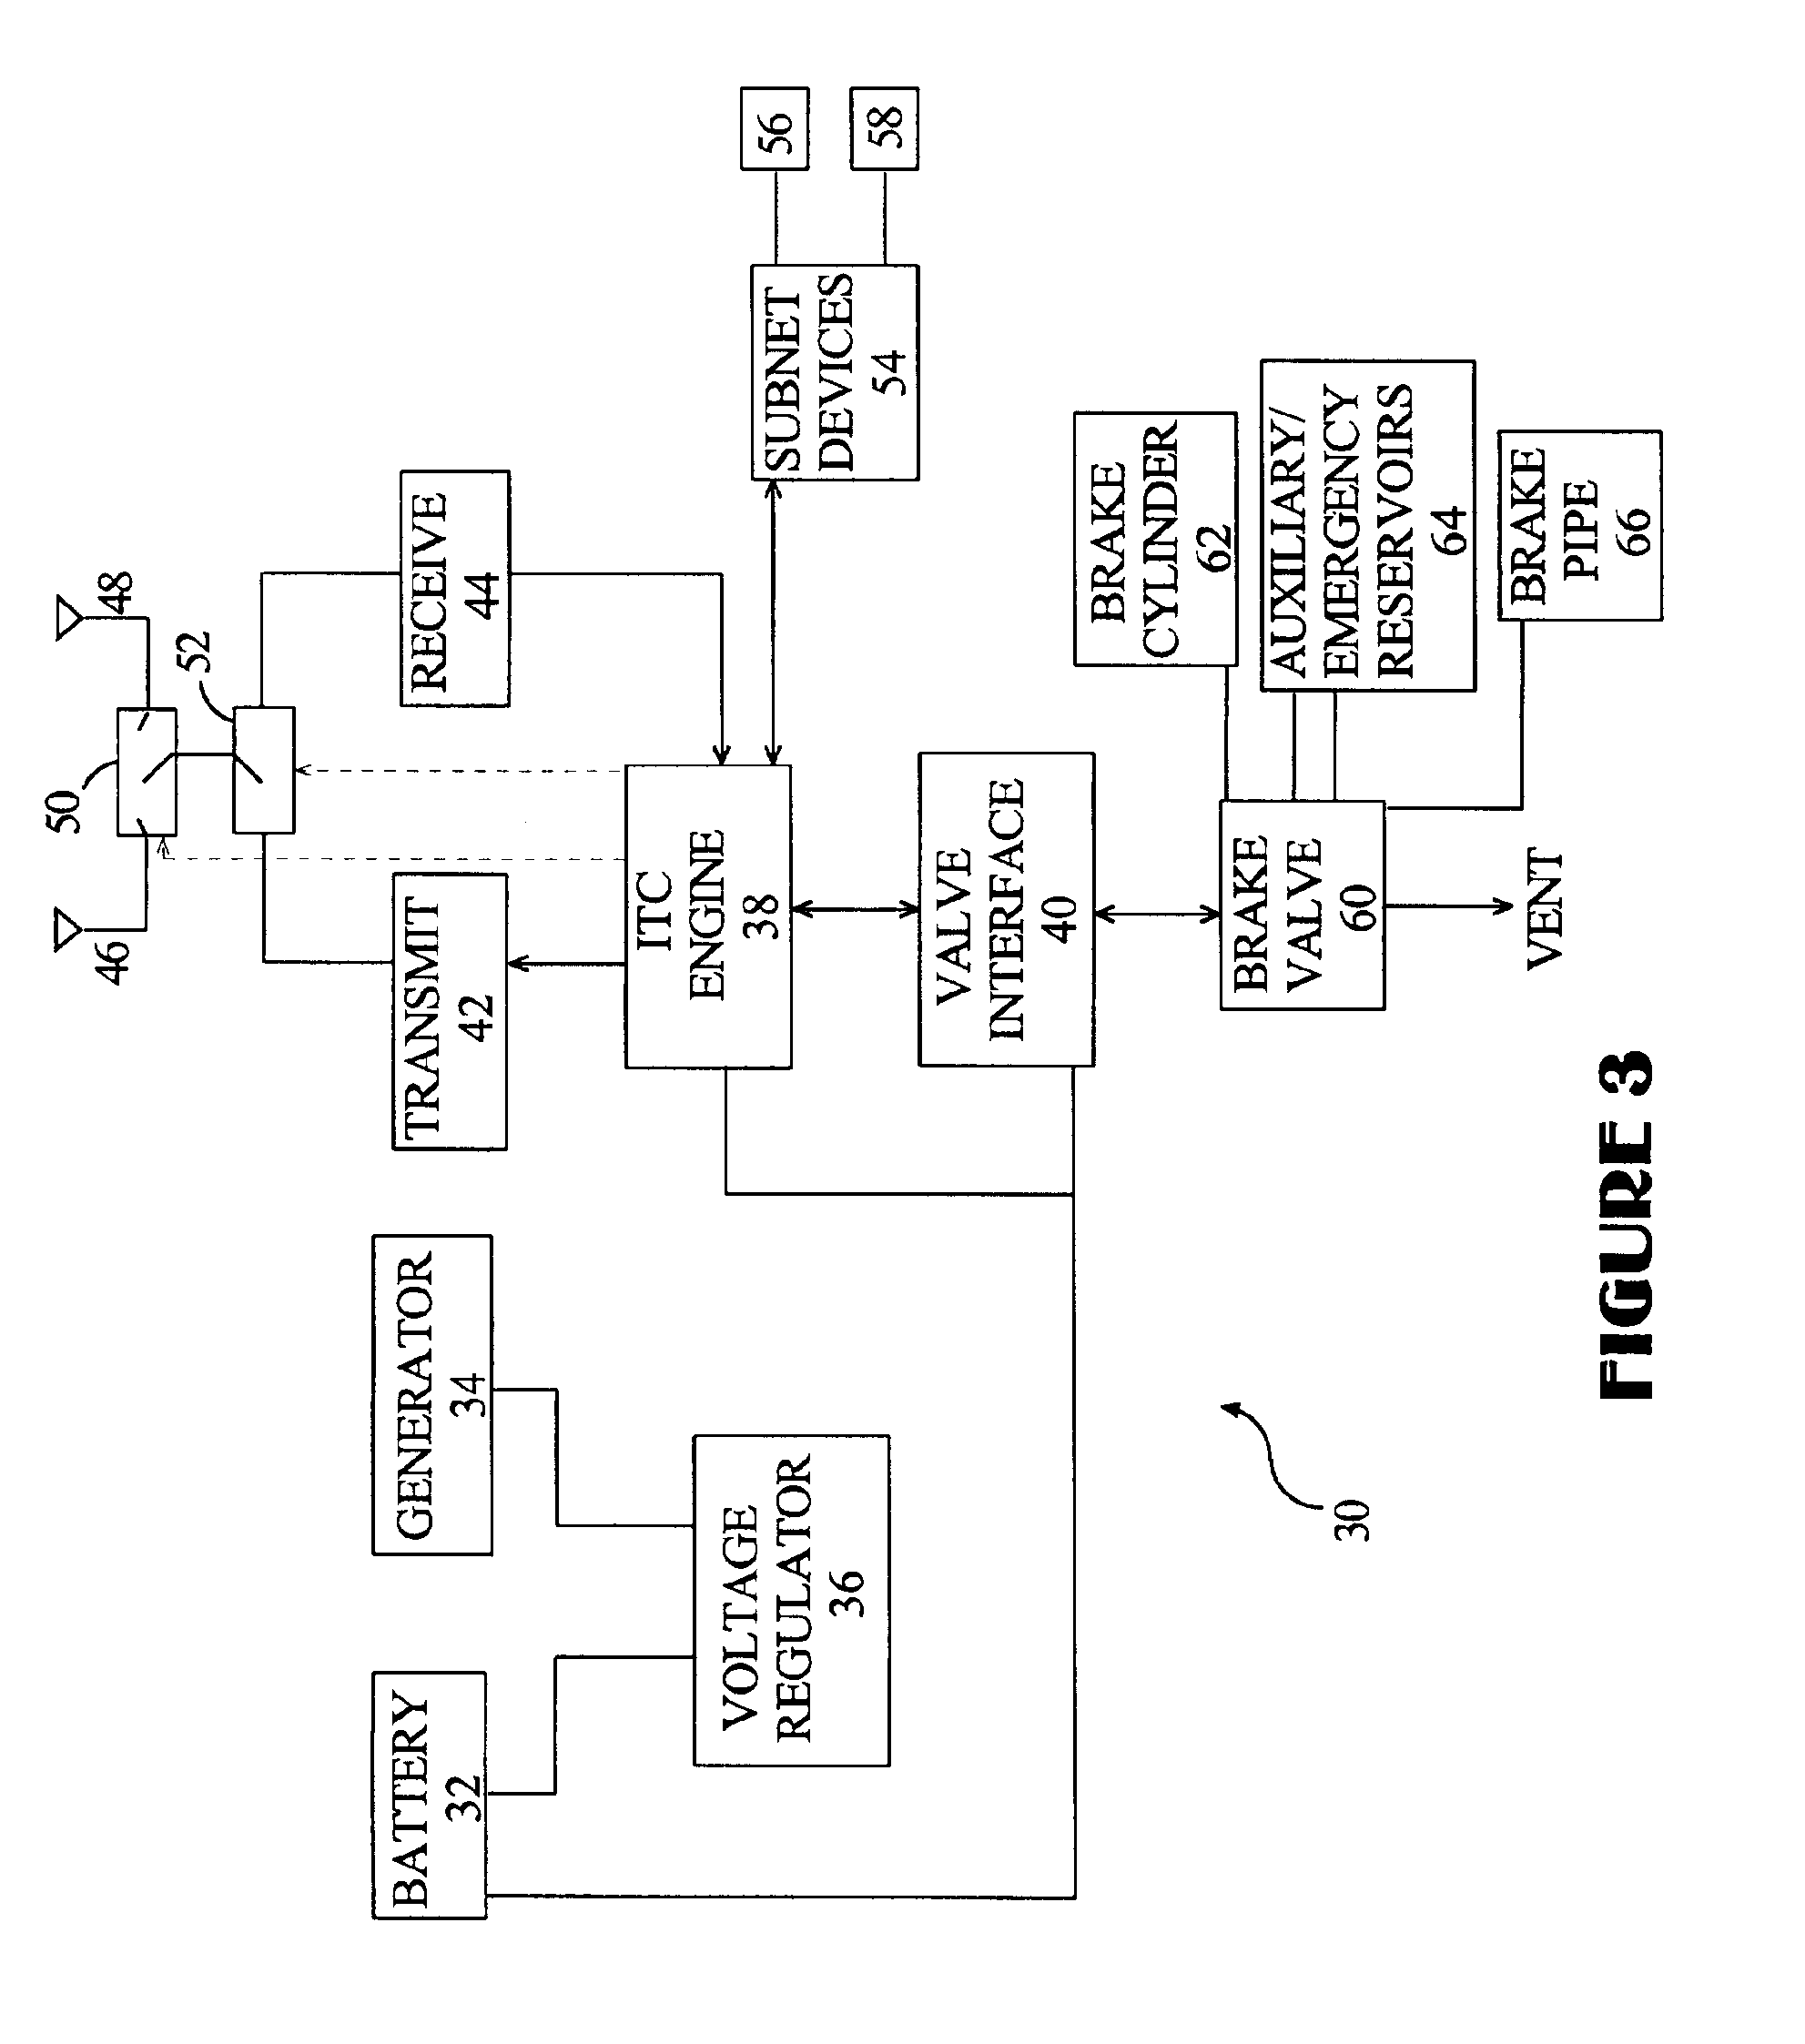 Communications system and method for interconnected networks having a linear topology, especially railways